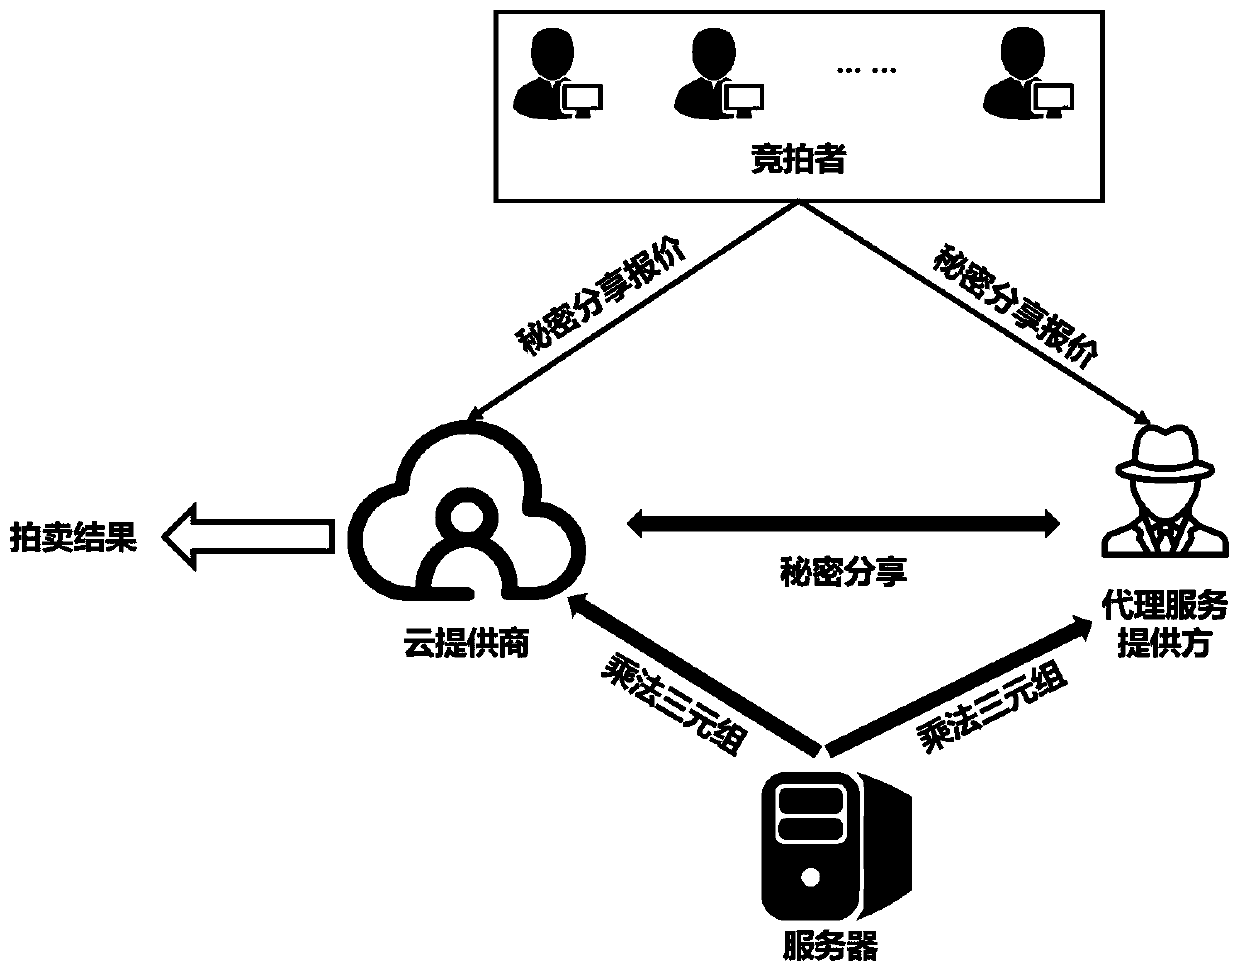 Dynamic virtual machine distribution method based on combined cloud auction mechanism and privacy protection